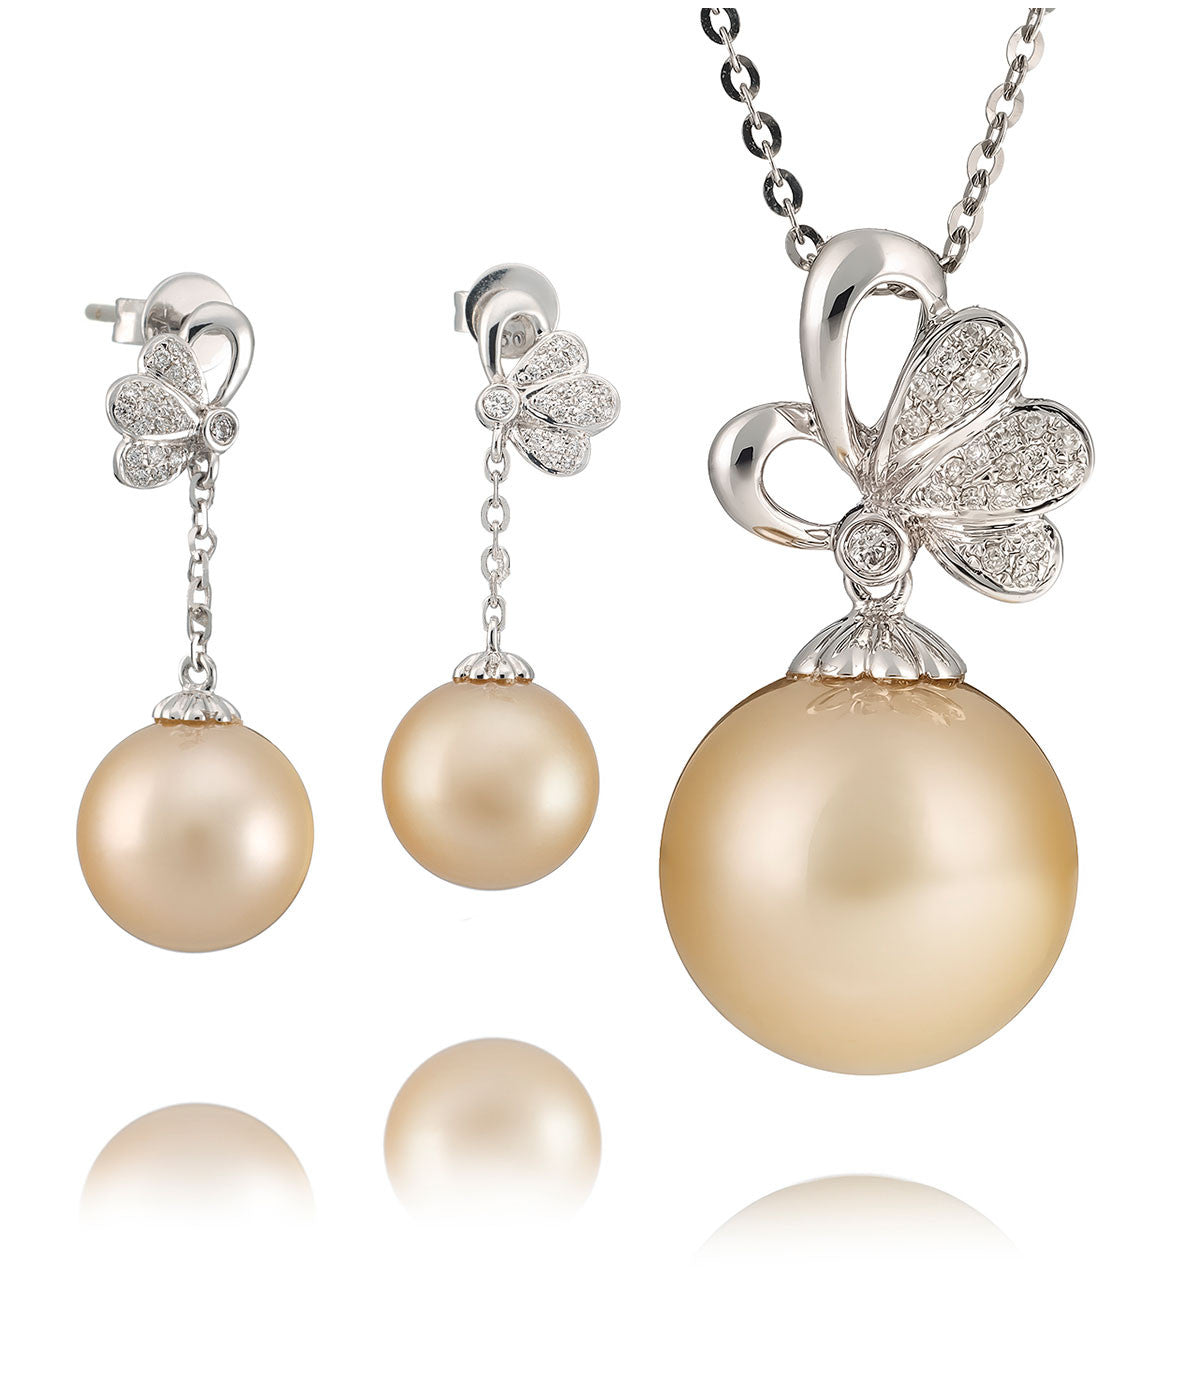 Golden South Sea Pearl & Diamond Necklace Earrings Set in 18k White Gold